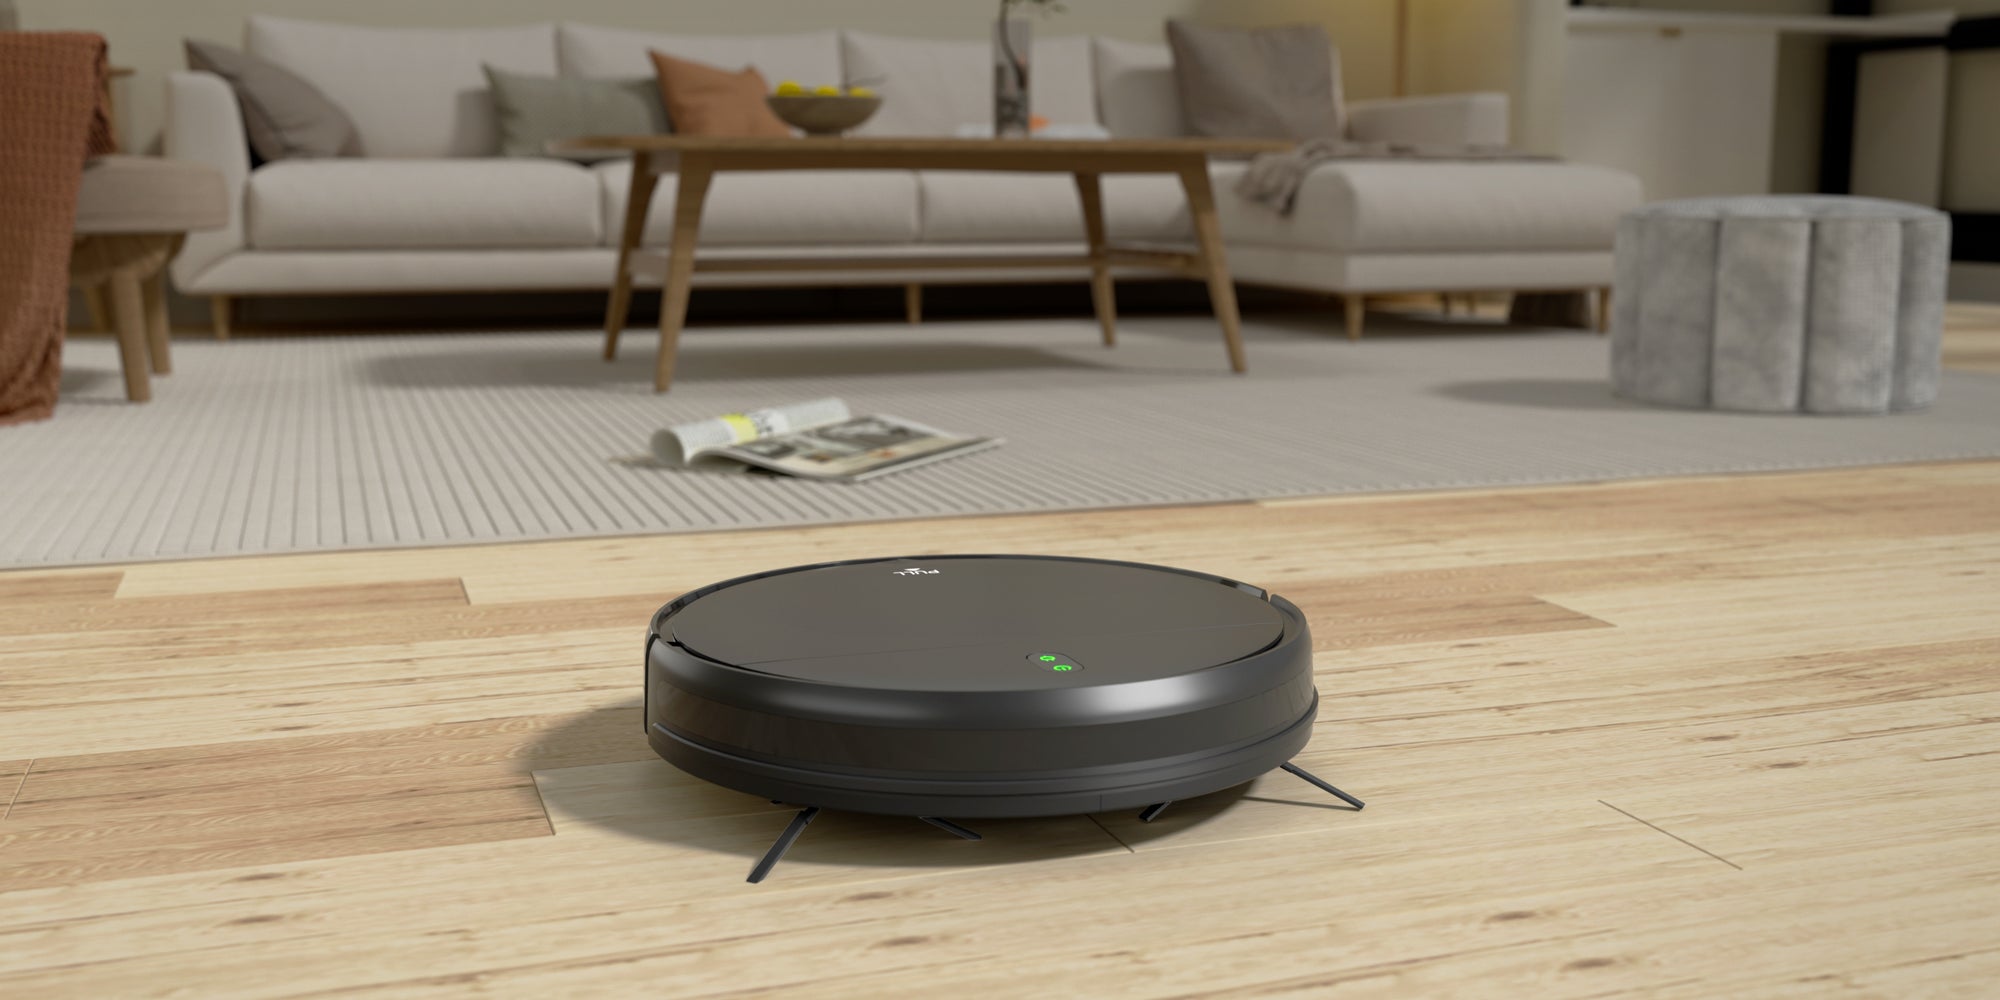 KEEP YOUR ROBOT VACUUM IN OPTIMAL CONDITION